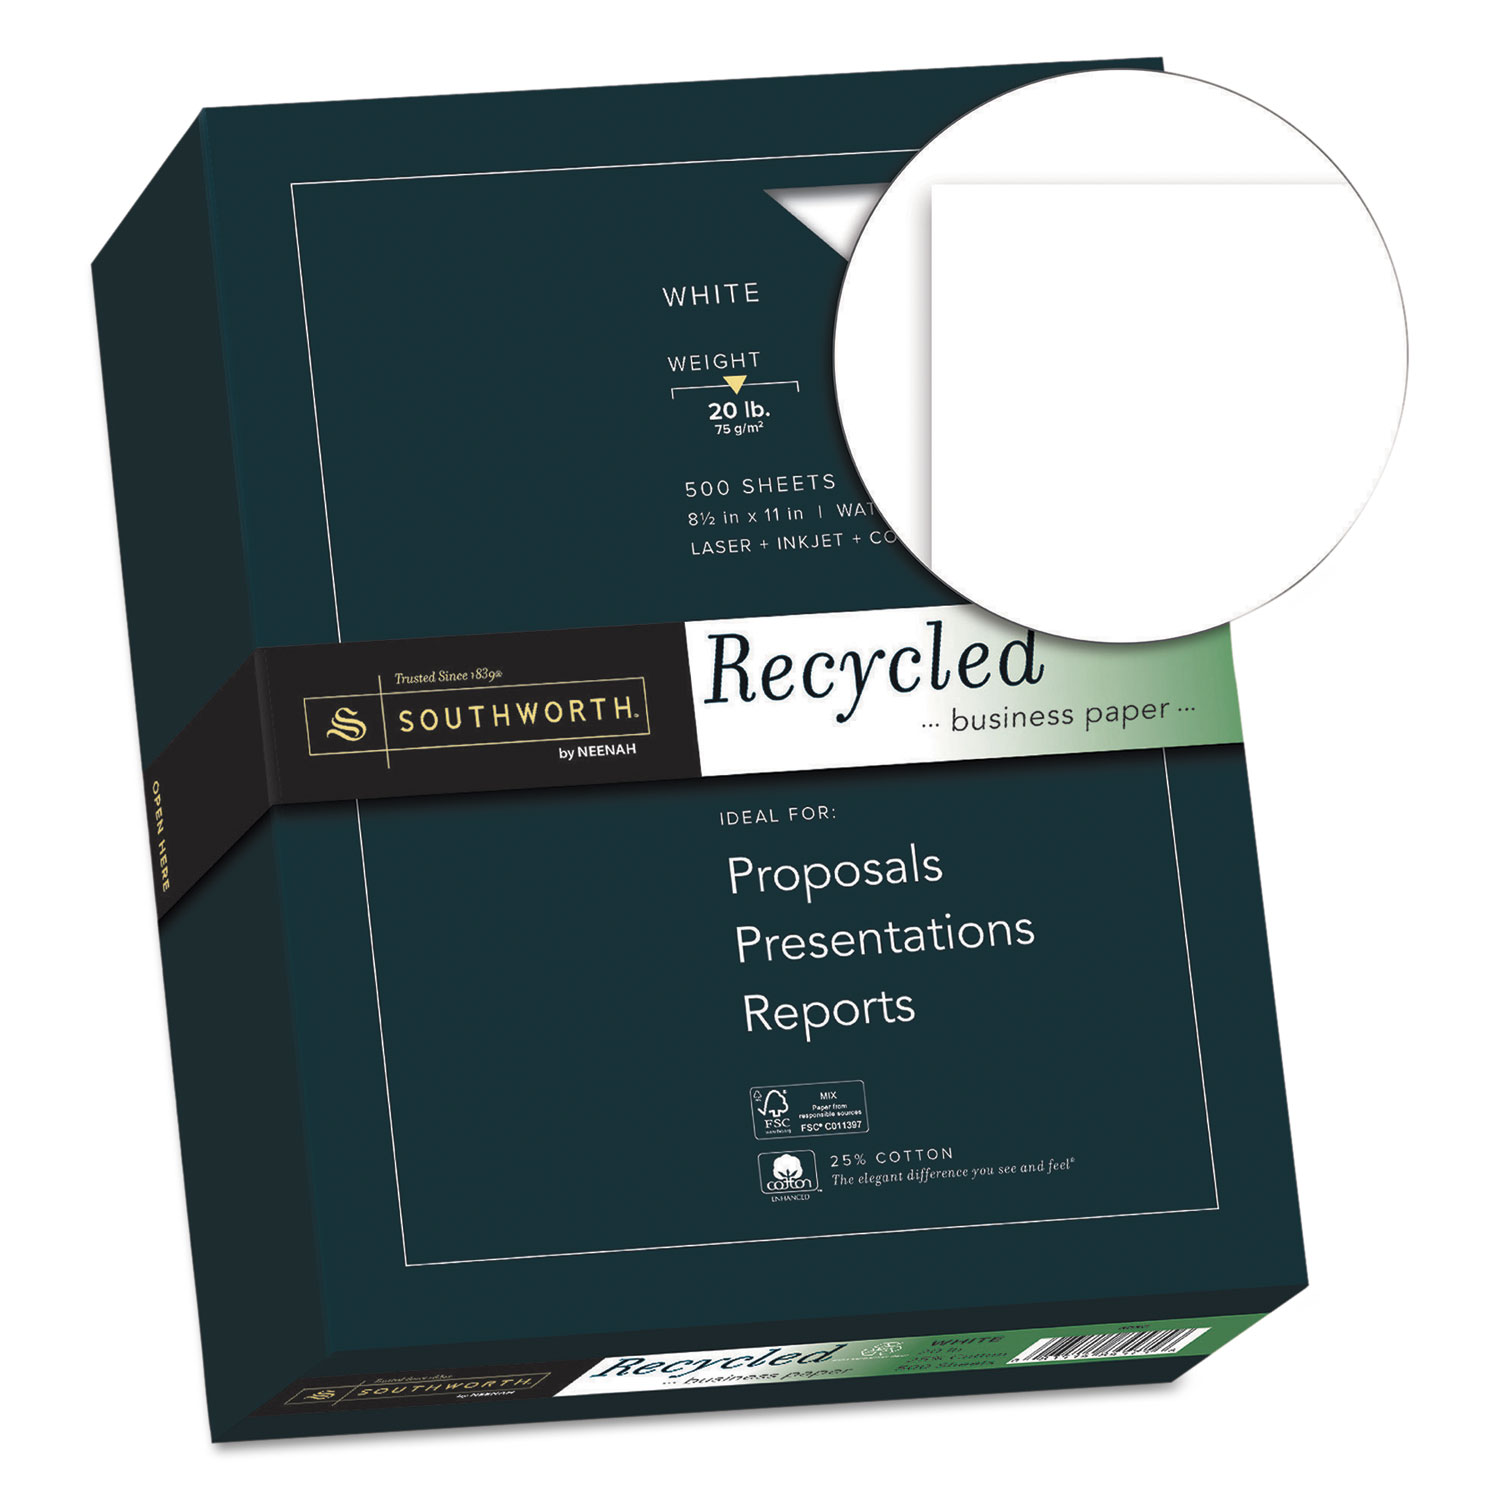 25% Cotton Recycled Business Paper, 20lb, 90 Bright, 8 1/2 x 11, 500 Sheets